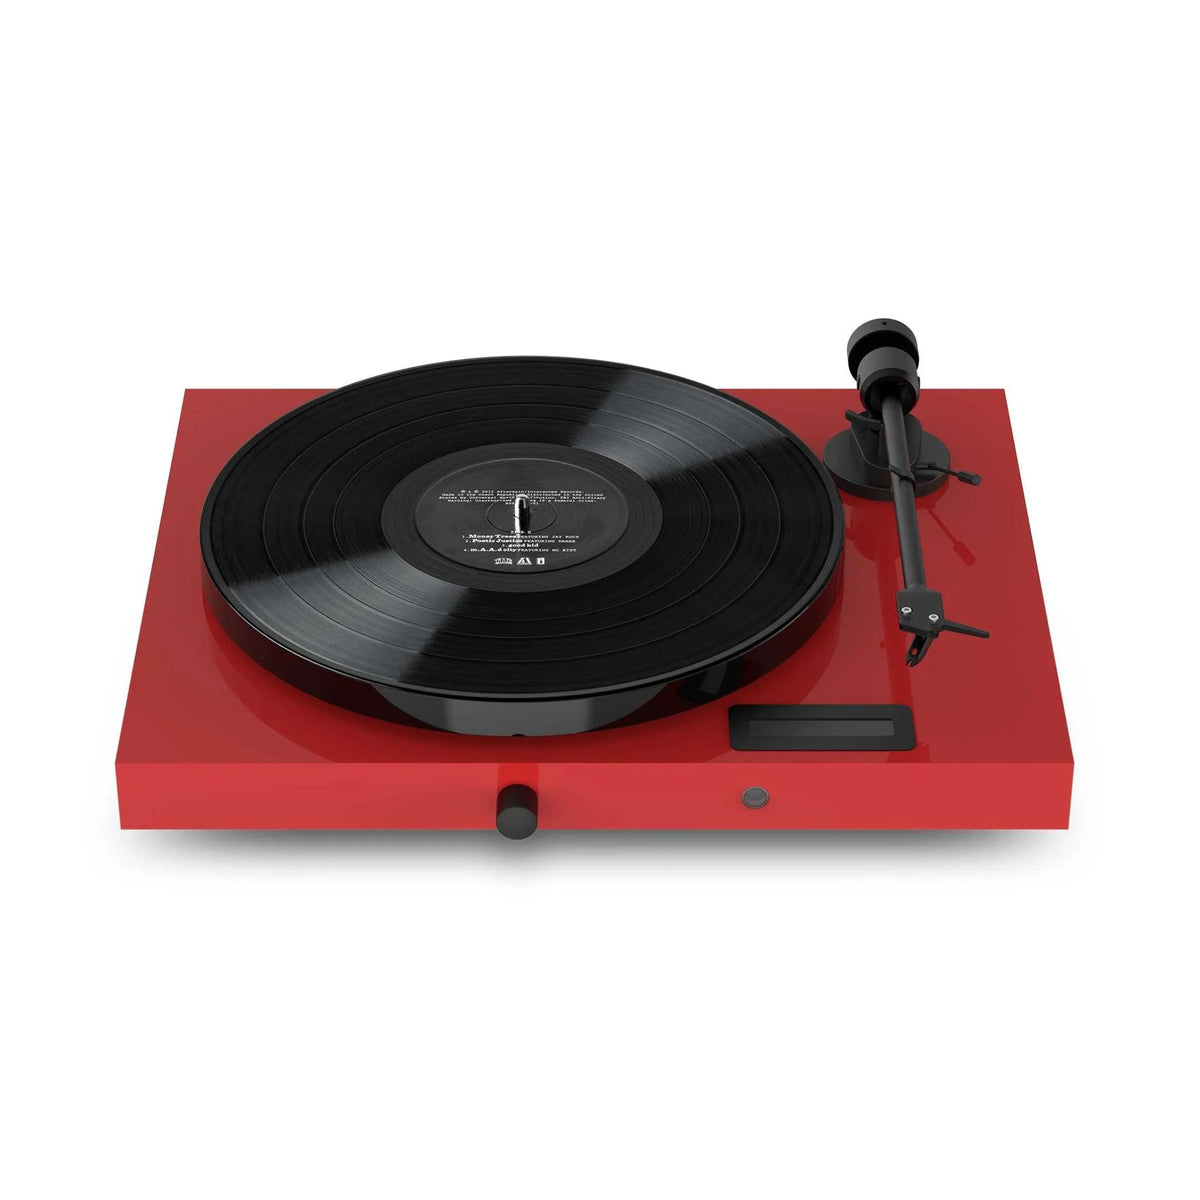 Pro-Ject Juke Box E1, Pro-Ject Audio Systems, Turntable - AVStore.in